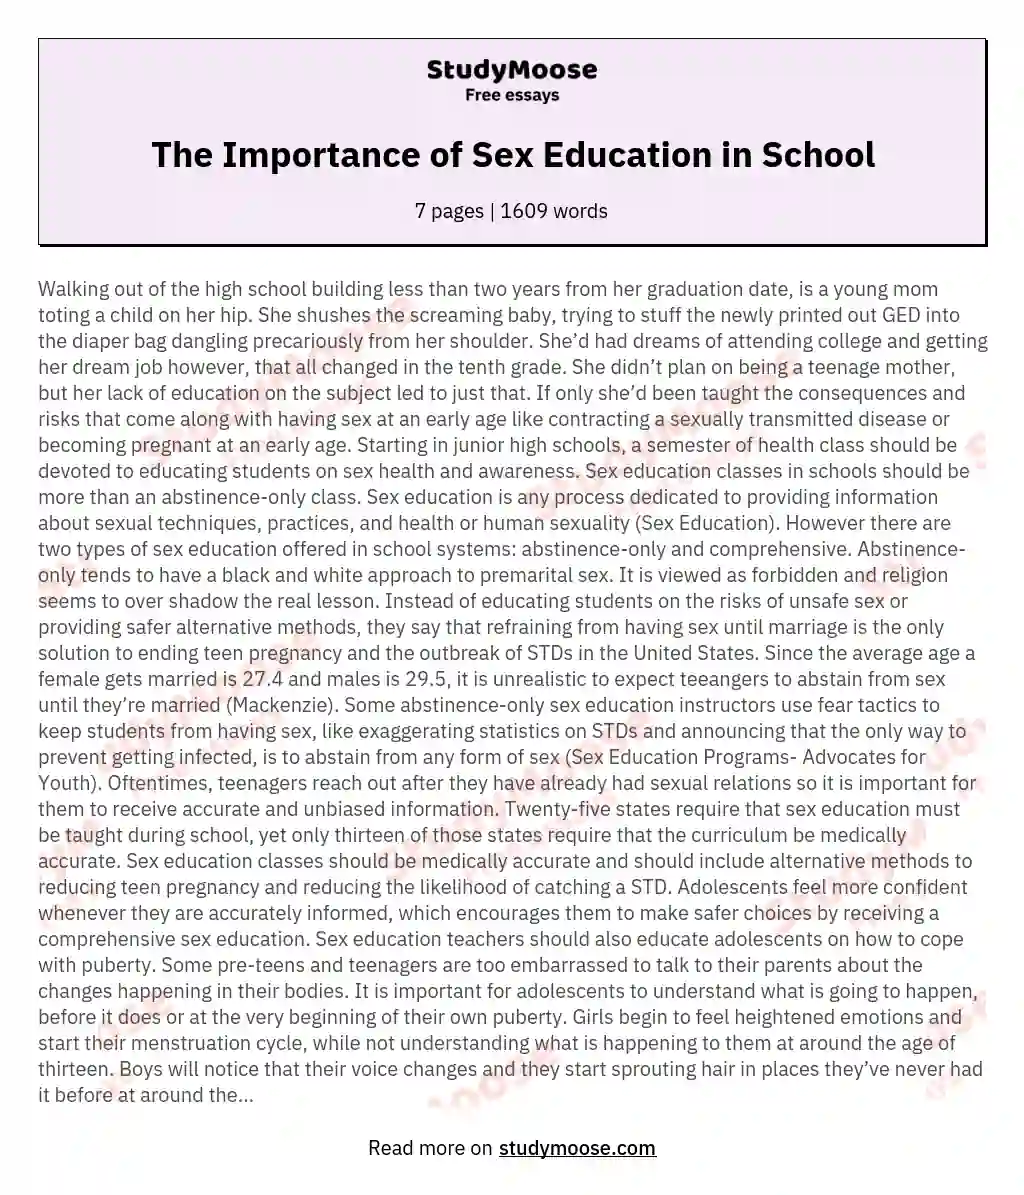 The Importance of Sex Education in School